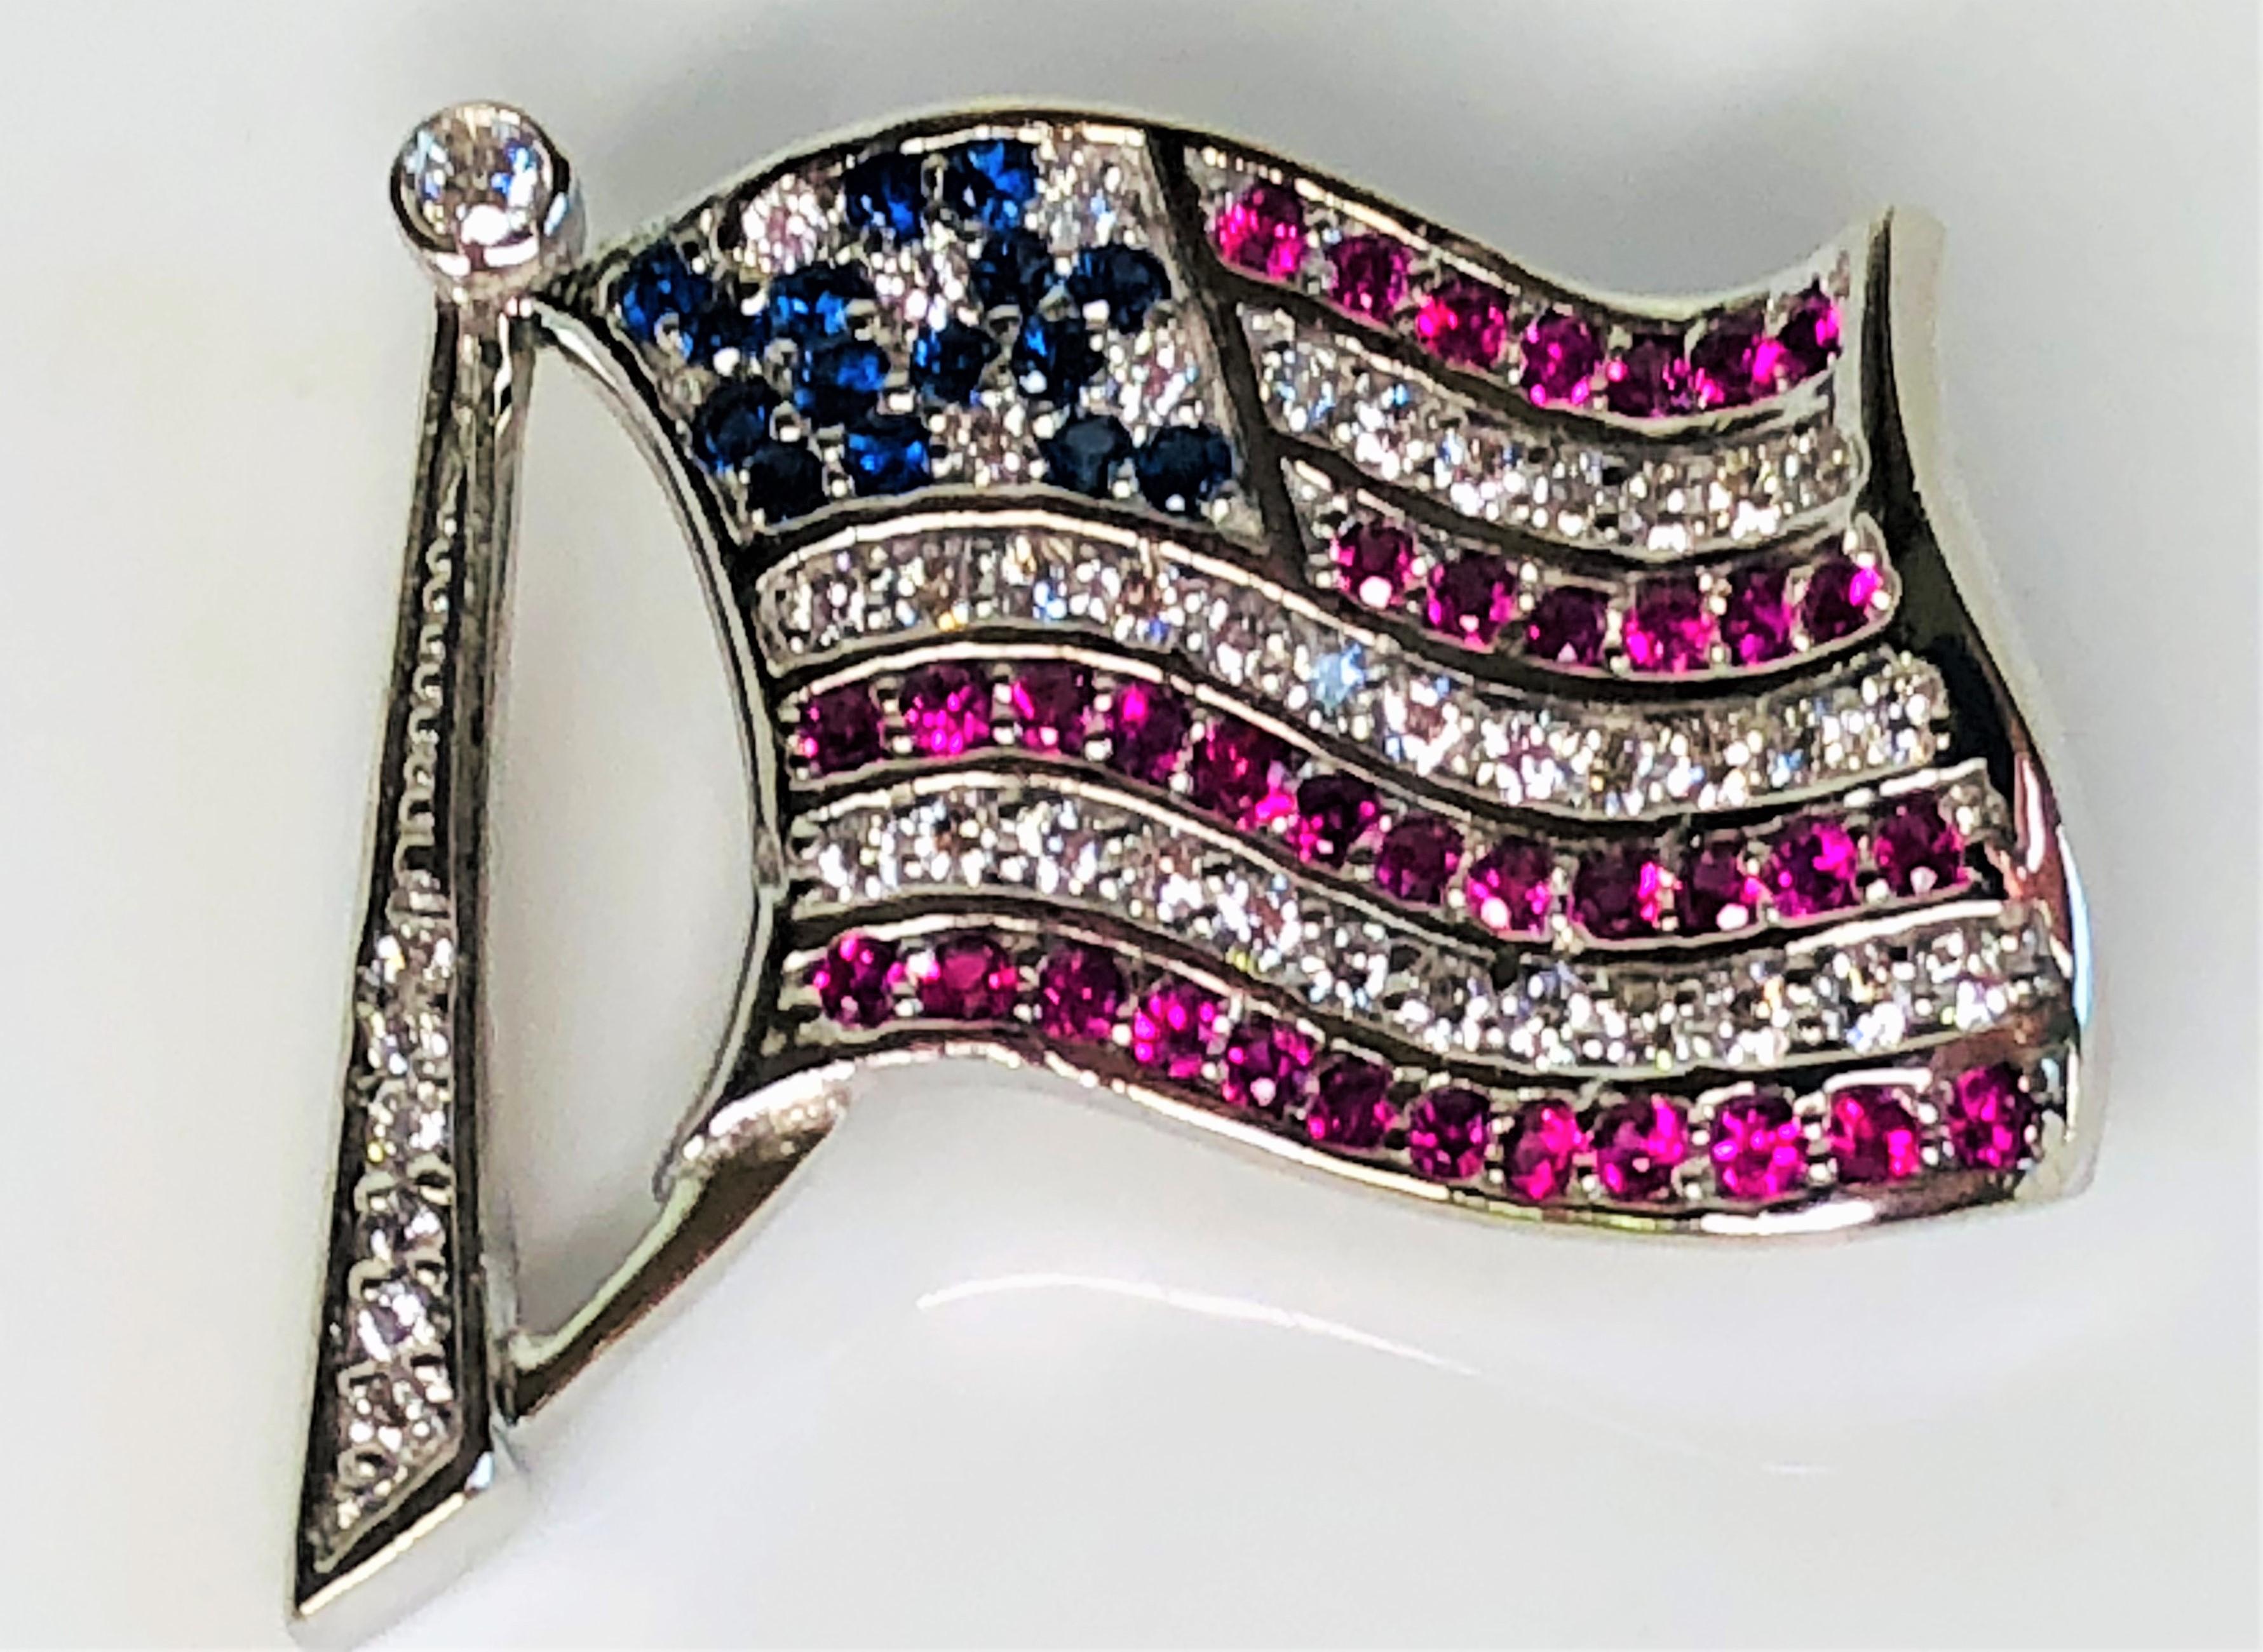 This American Flag pendant really sparkles!  
.47 total carat weight (tcw) sapphire, .38 tcw, ruby, and .60 tcw diamond.
2 loops on back are approximately 7mm wide to accommodate many different necklaces.
Can be worn has a pendant on a chain or a